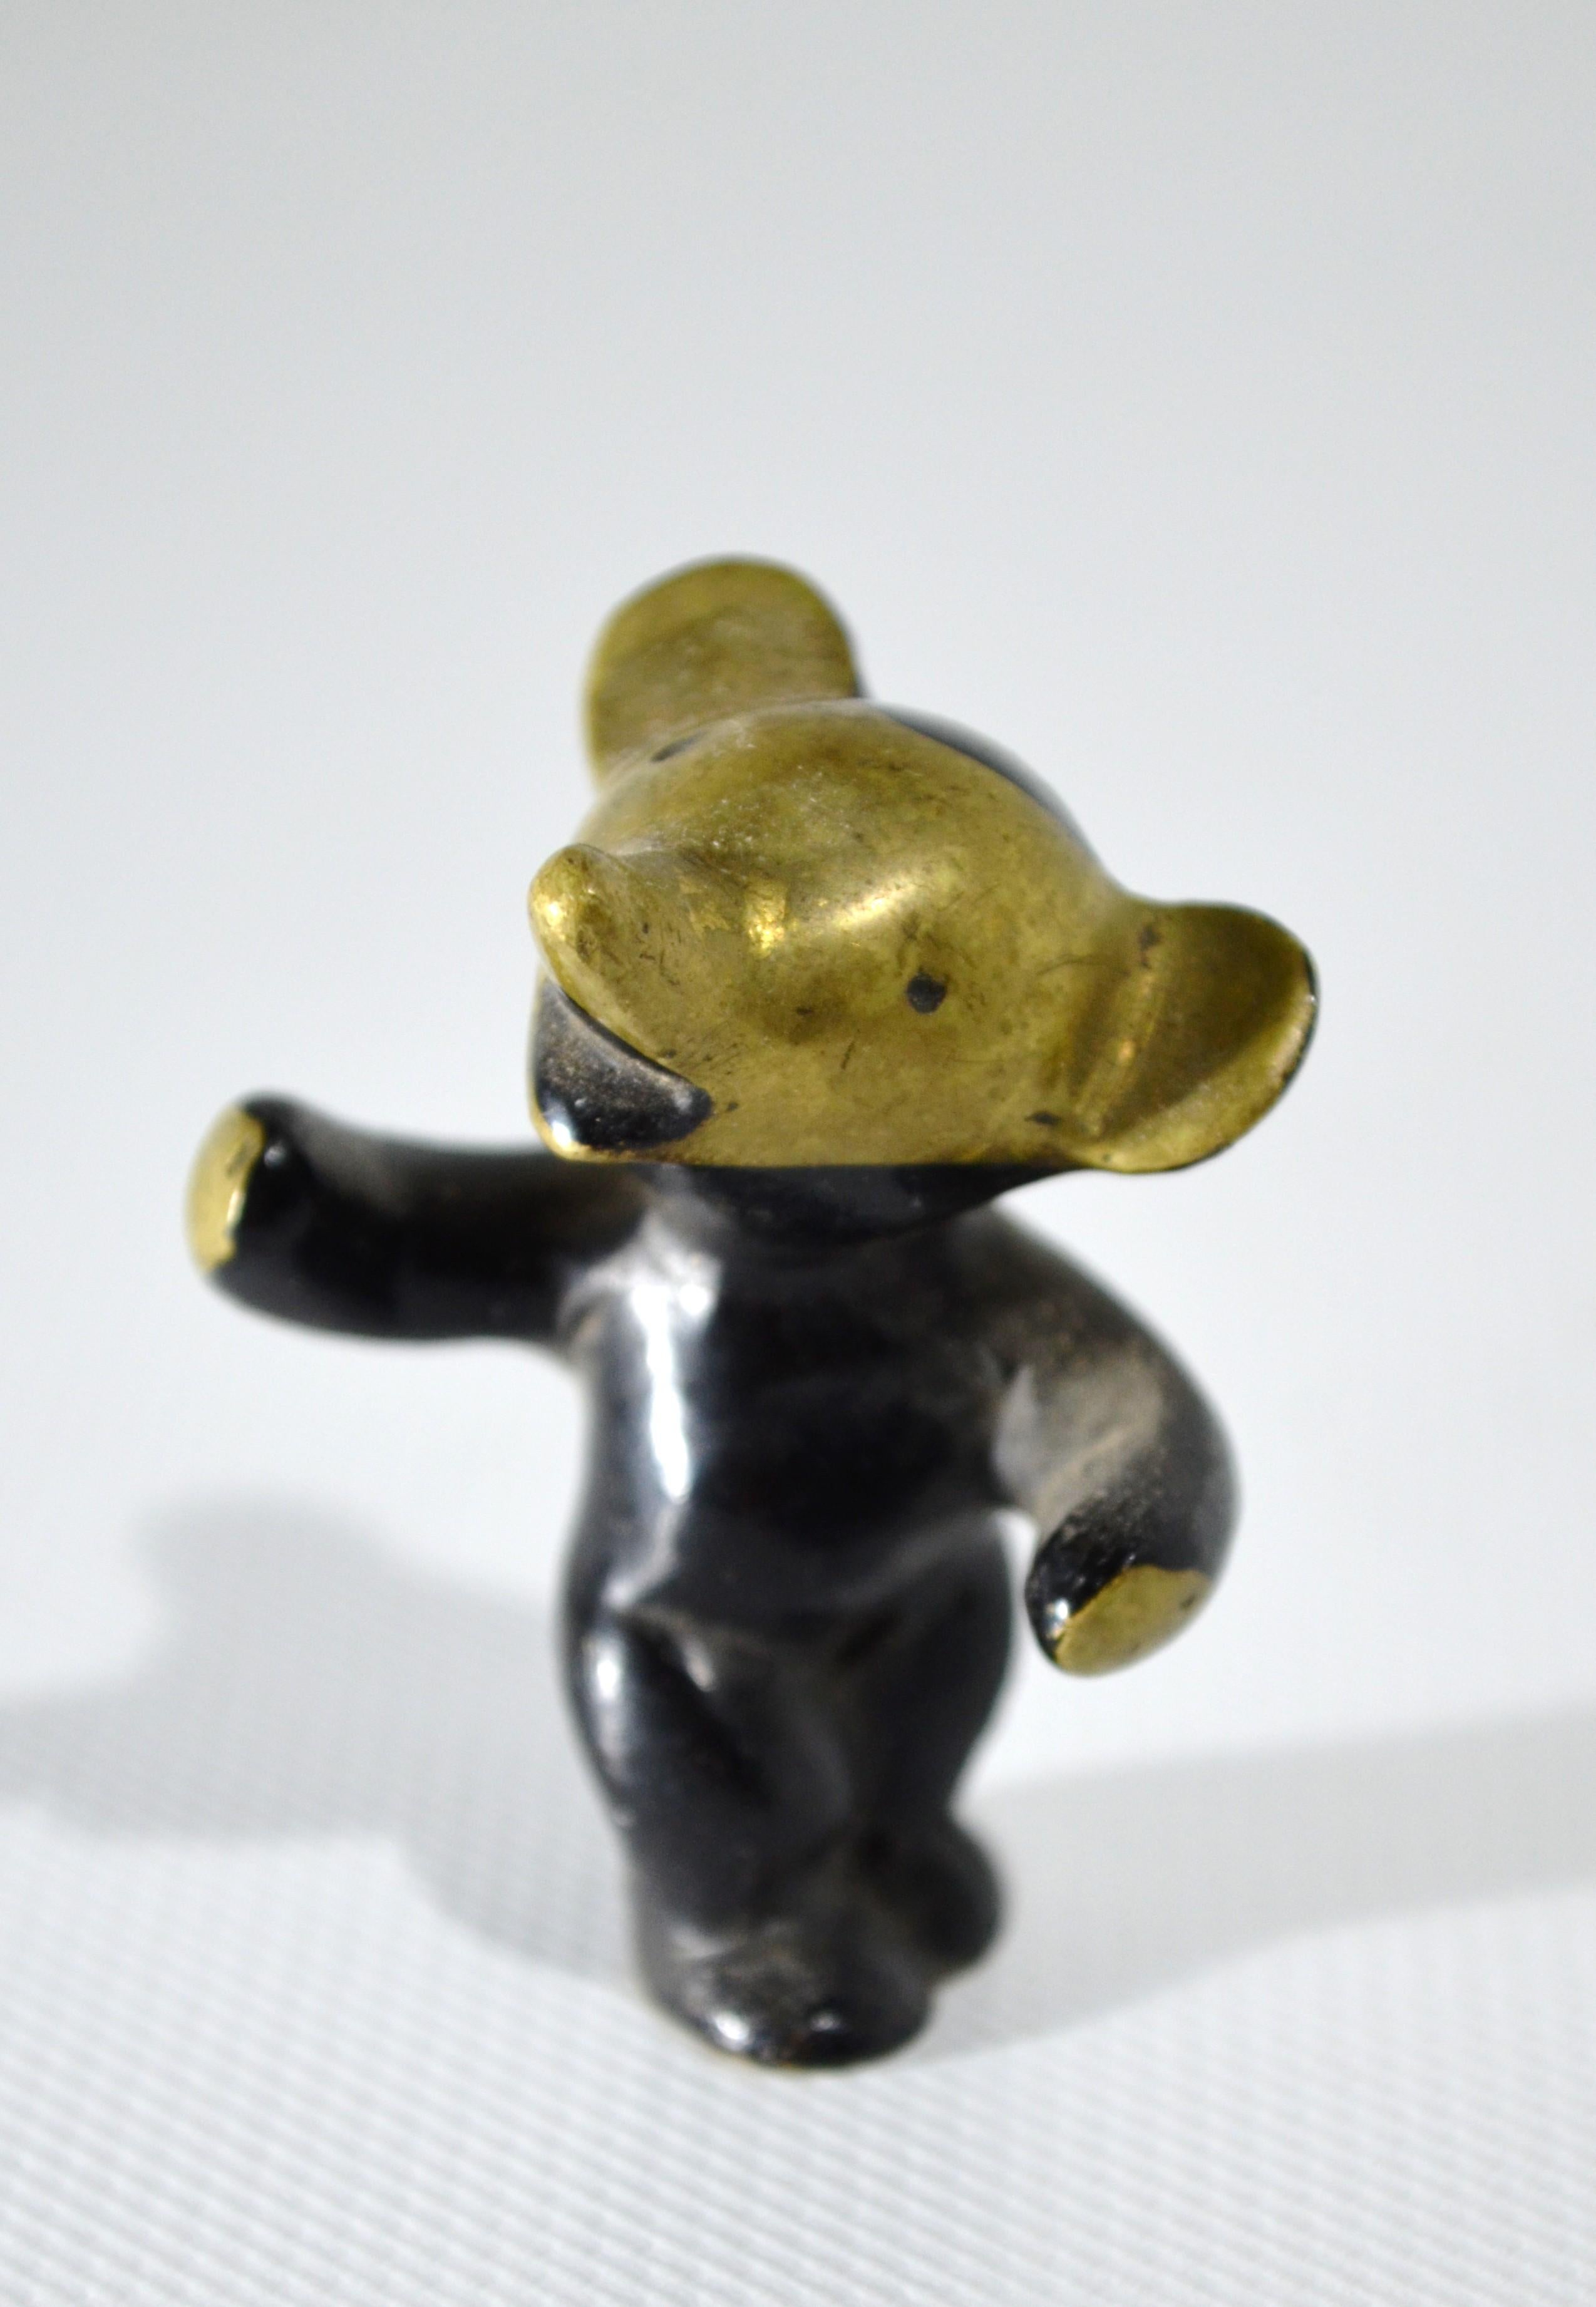 Beautiful and charming little teddy bear in black golden line from the famous designer designer
Walter Bosse (1904 - 1979)
Beautiful original patina from the mid-20th century.

Height: 50mm.